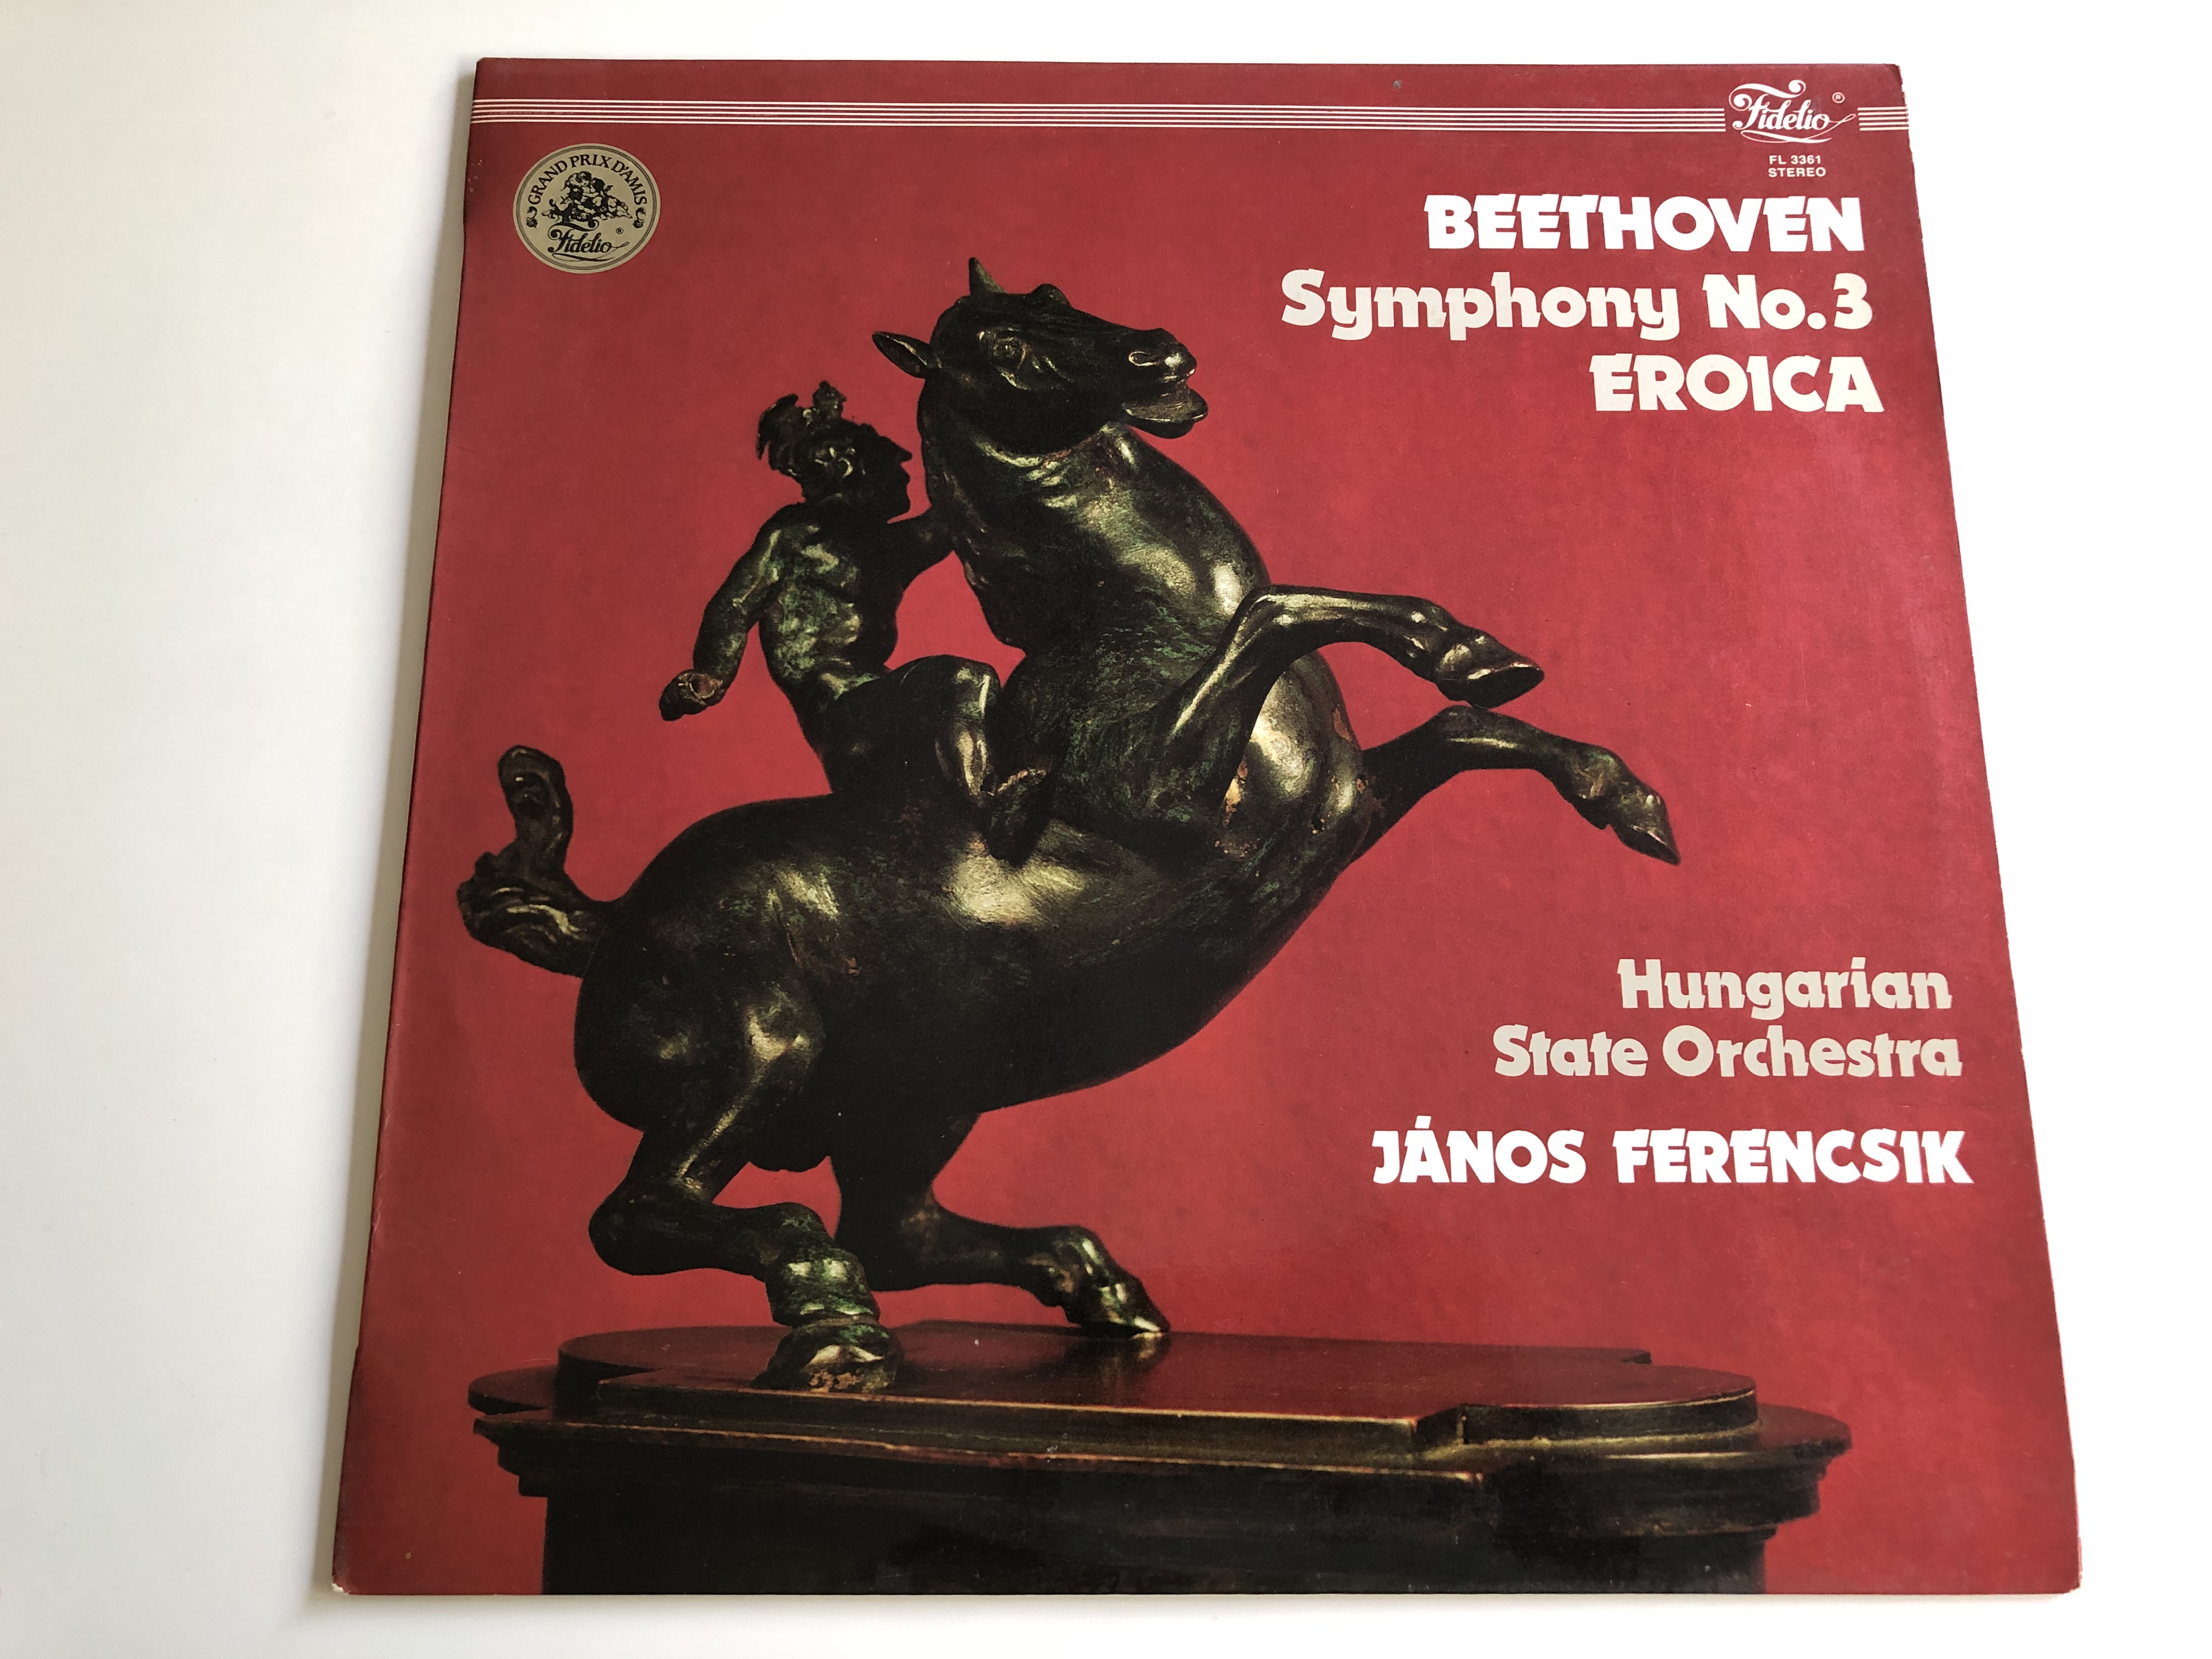 beethoven-symphony-no.-3-eroica-hungarian-state-orchestra-conducted-by-j-nos-ferencsik-fidelio-fl-3361-stereo-1-.jpg